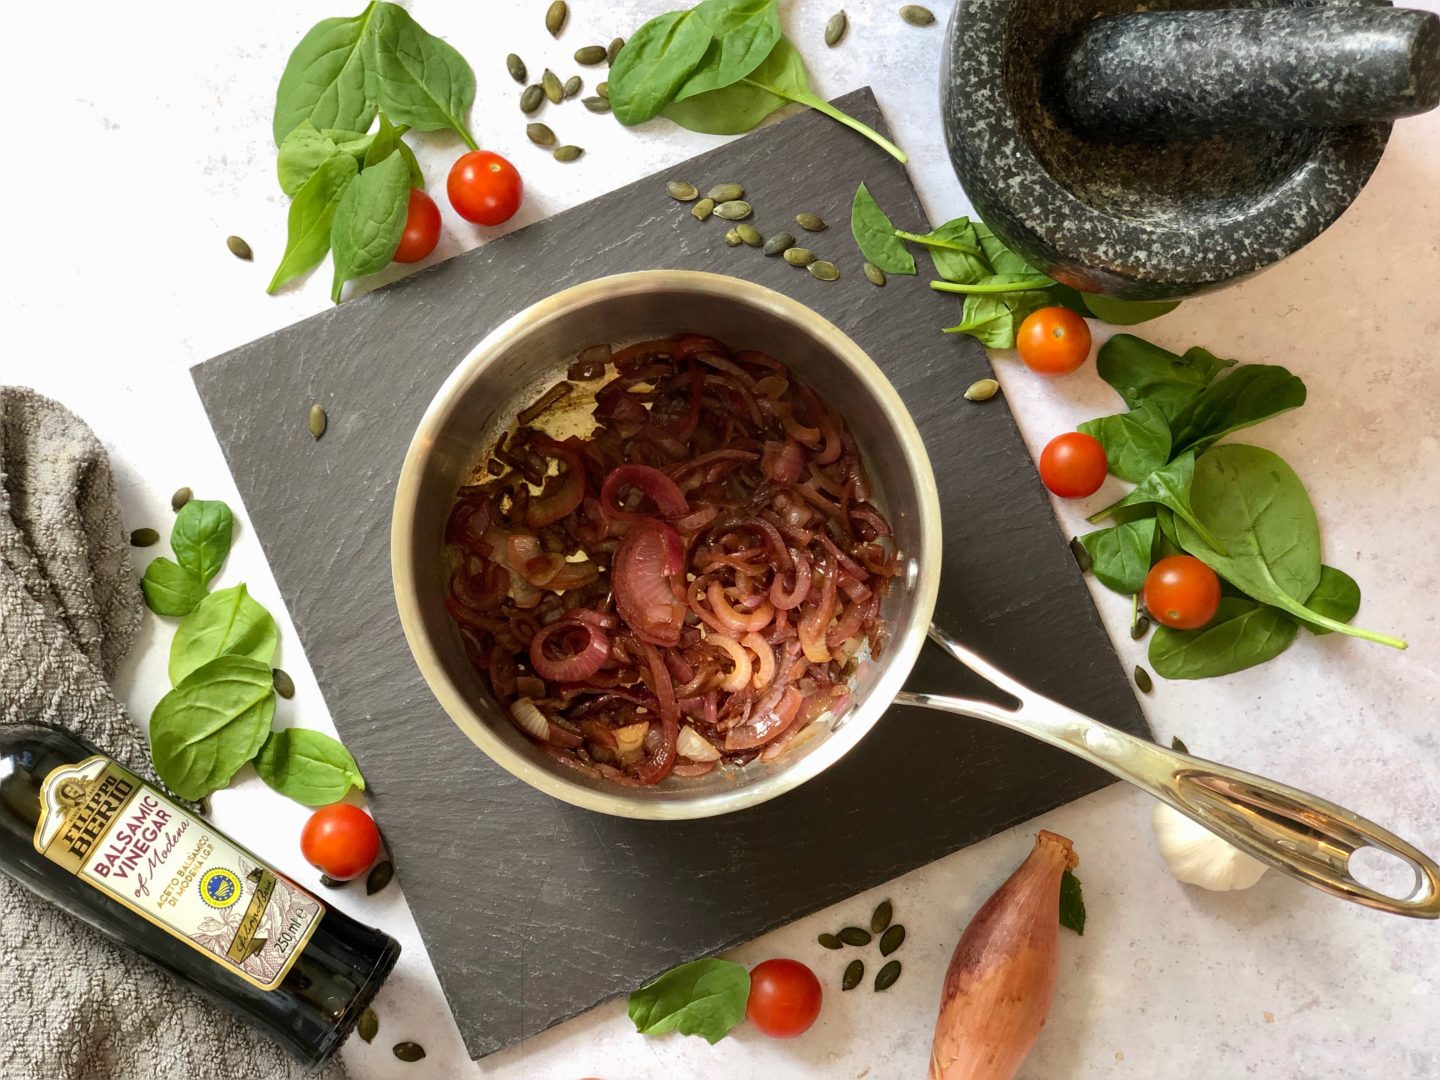 AD: Pan fried halloumi with caramelised red onion and lentils recipe plus £10 off at Hello Fresh